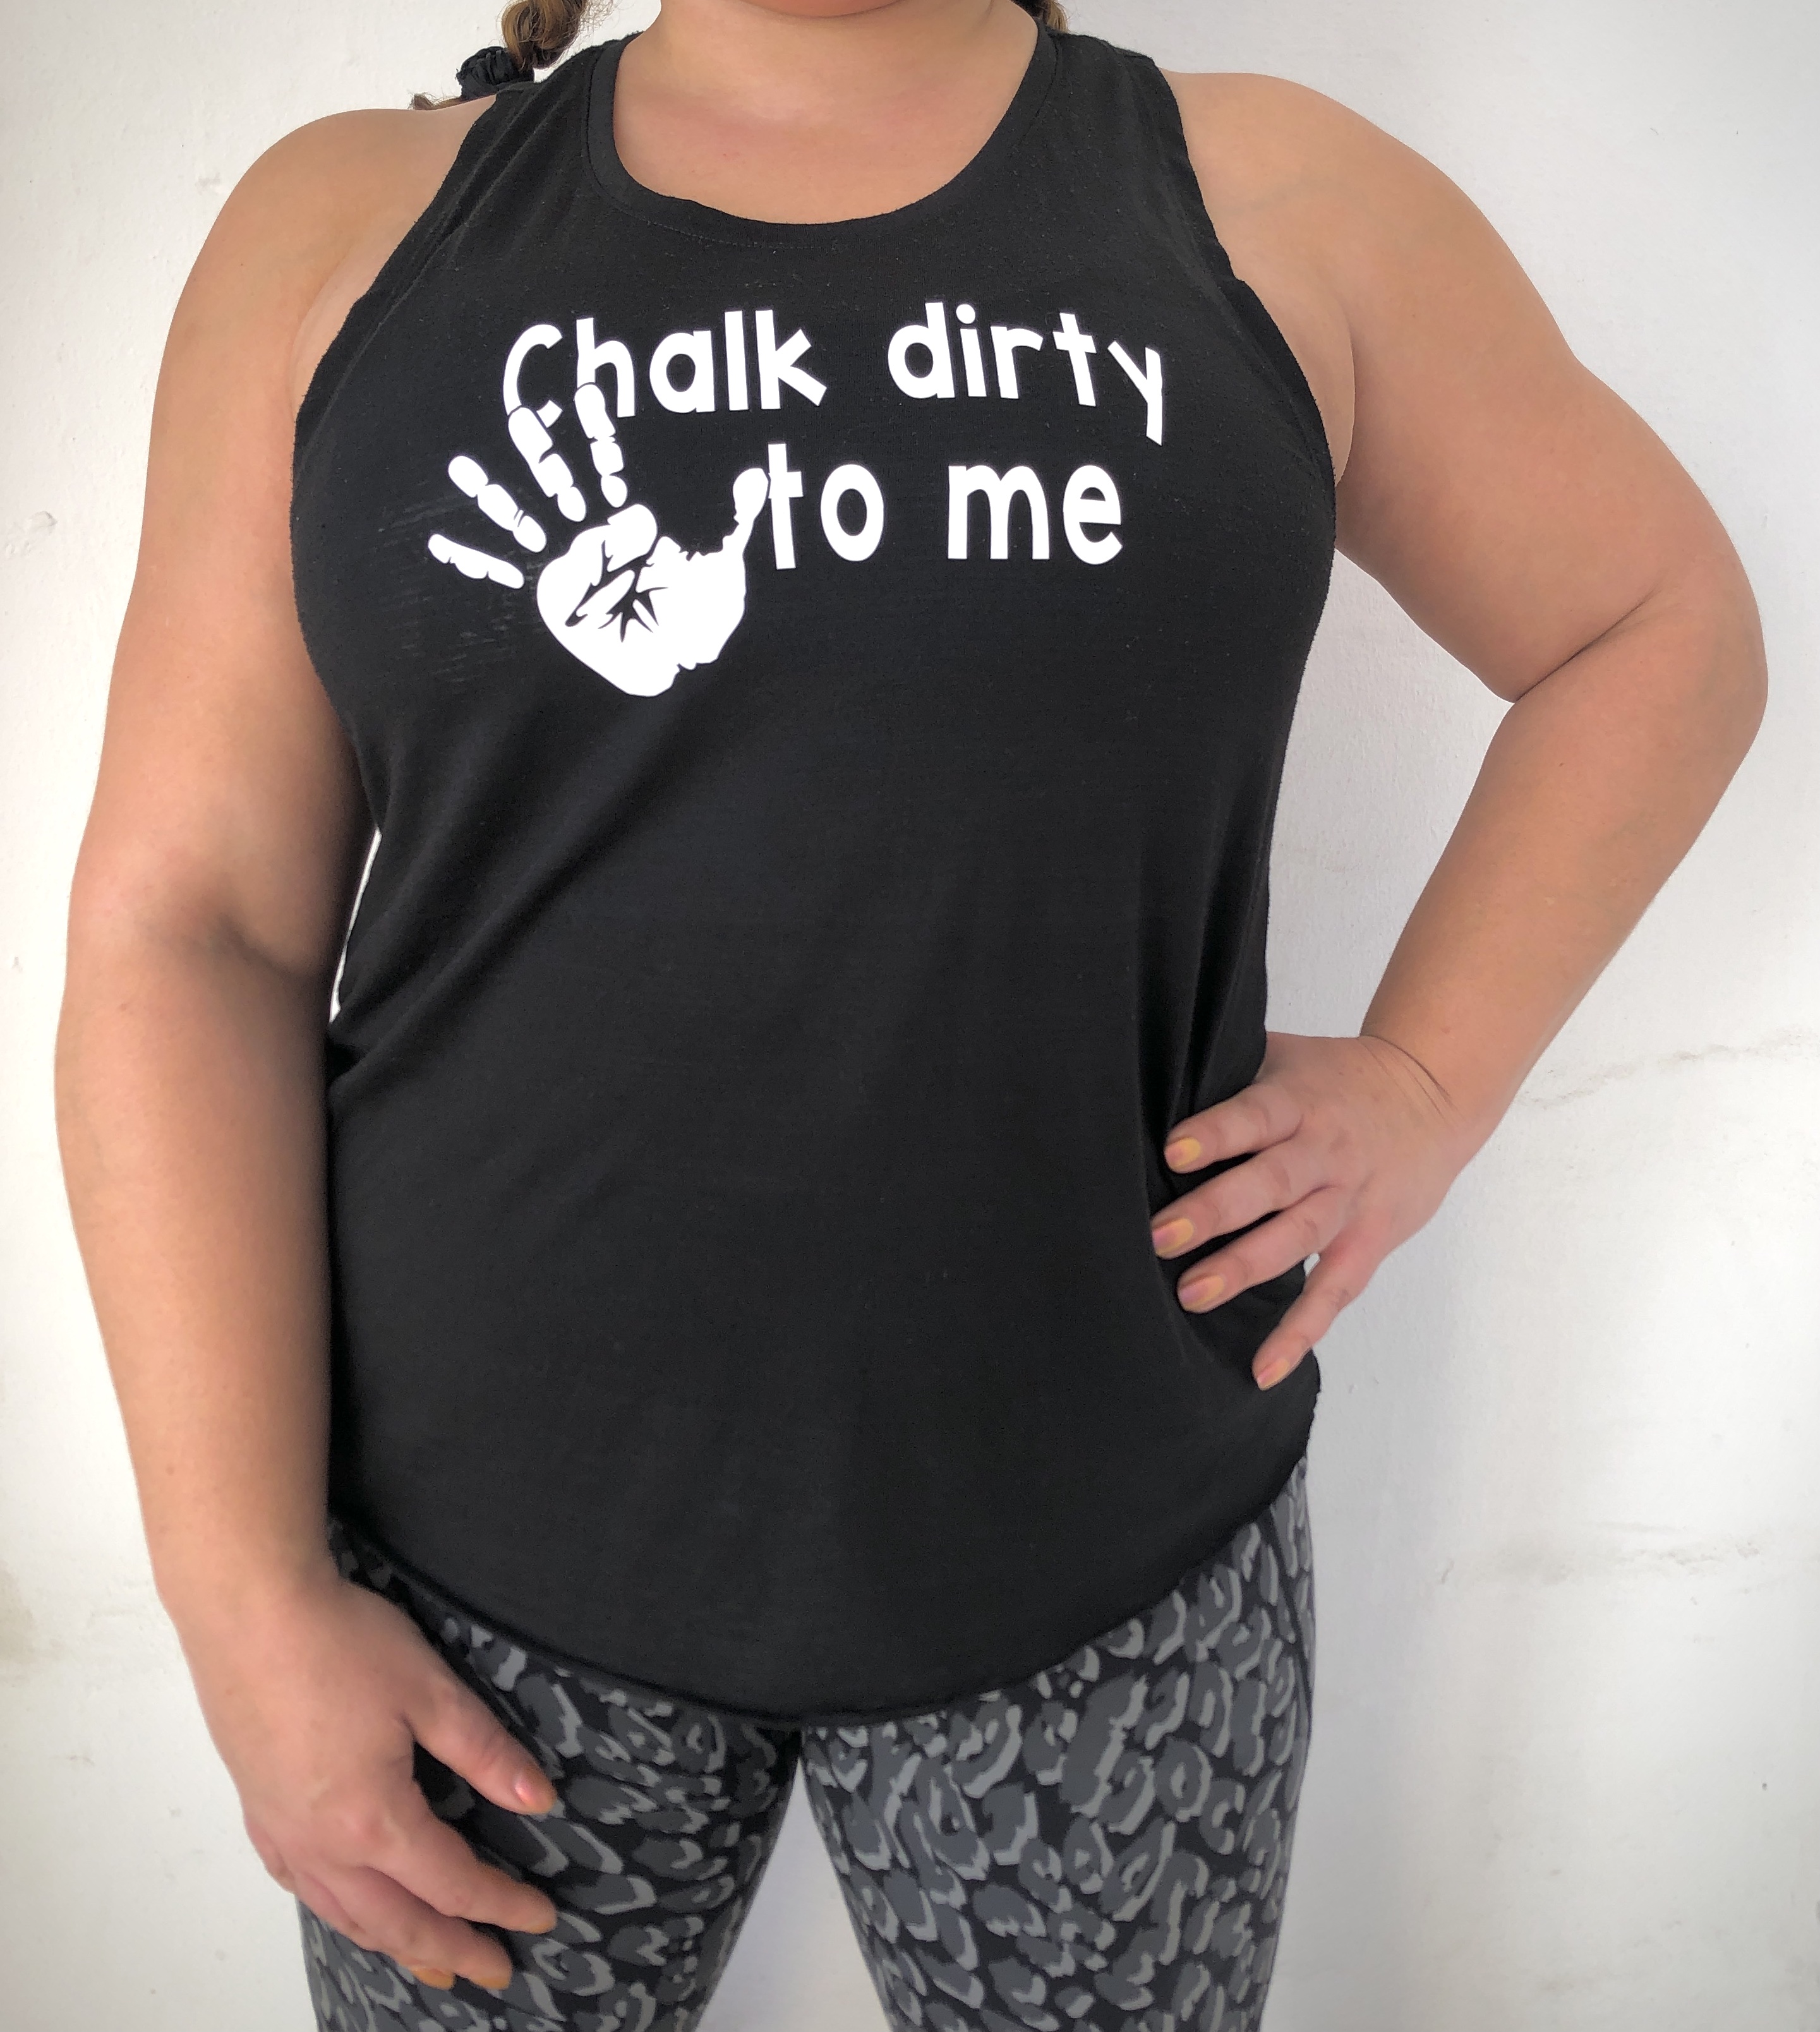 Rubber Normaal handel Loose fit tank top/Chalk dirty to me/Black - Spartan Fitness Gear